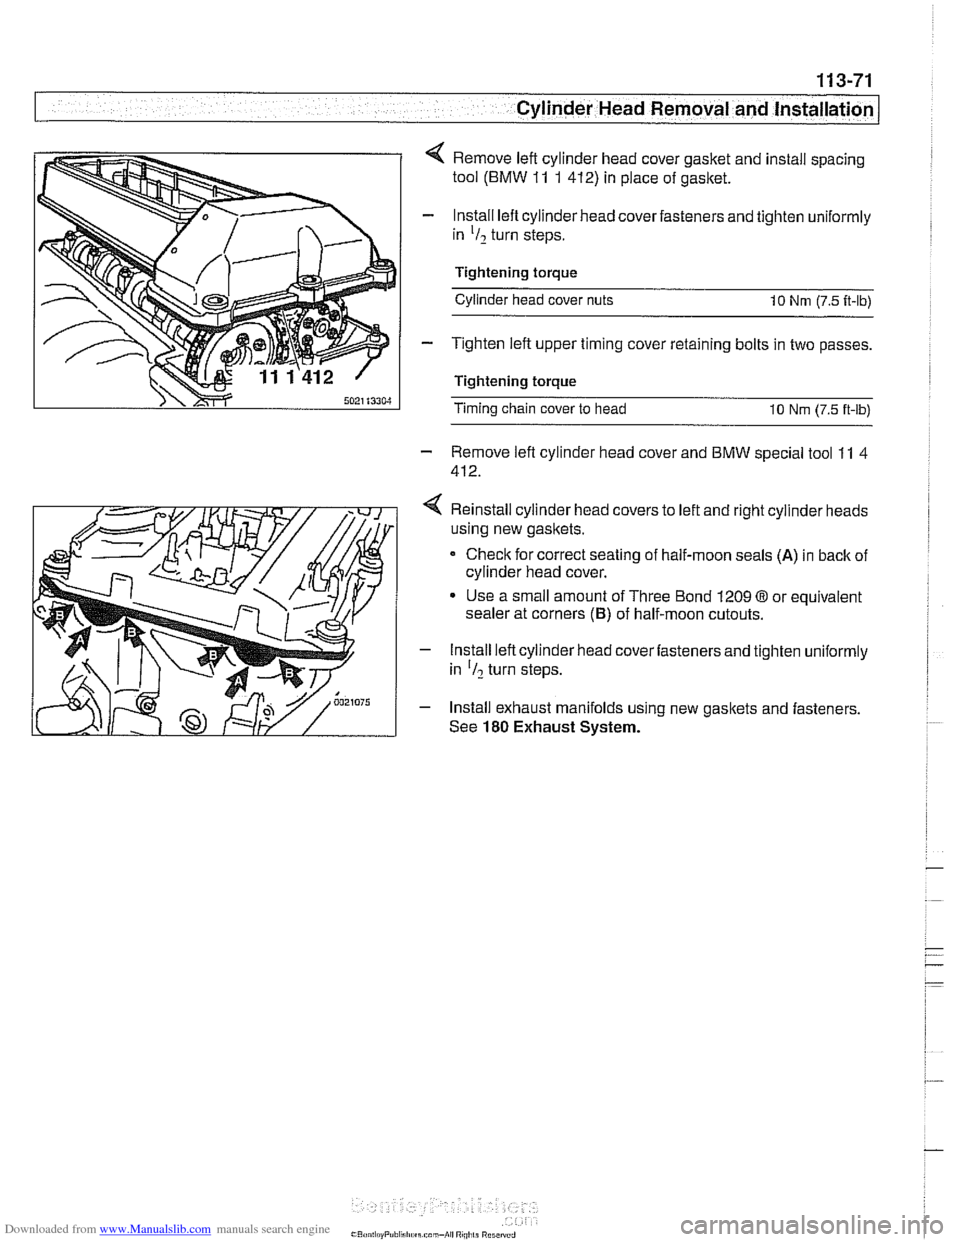 BMW 530i 2001 E39 Owners Guide Downloaded from www.Manualslib.com manuals search engine 
. ." . . 
I - Cylinder Head Removal - and instard -- 
4 Remove left cylinder  head cover gasket  and install  spacing 
tool  (BMW 
11 1 412)  